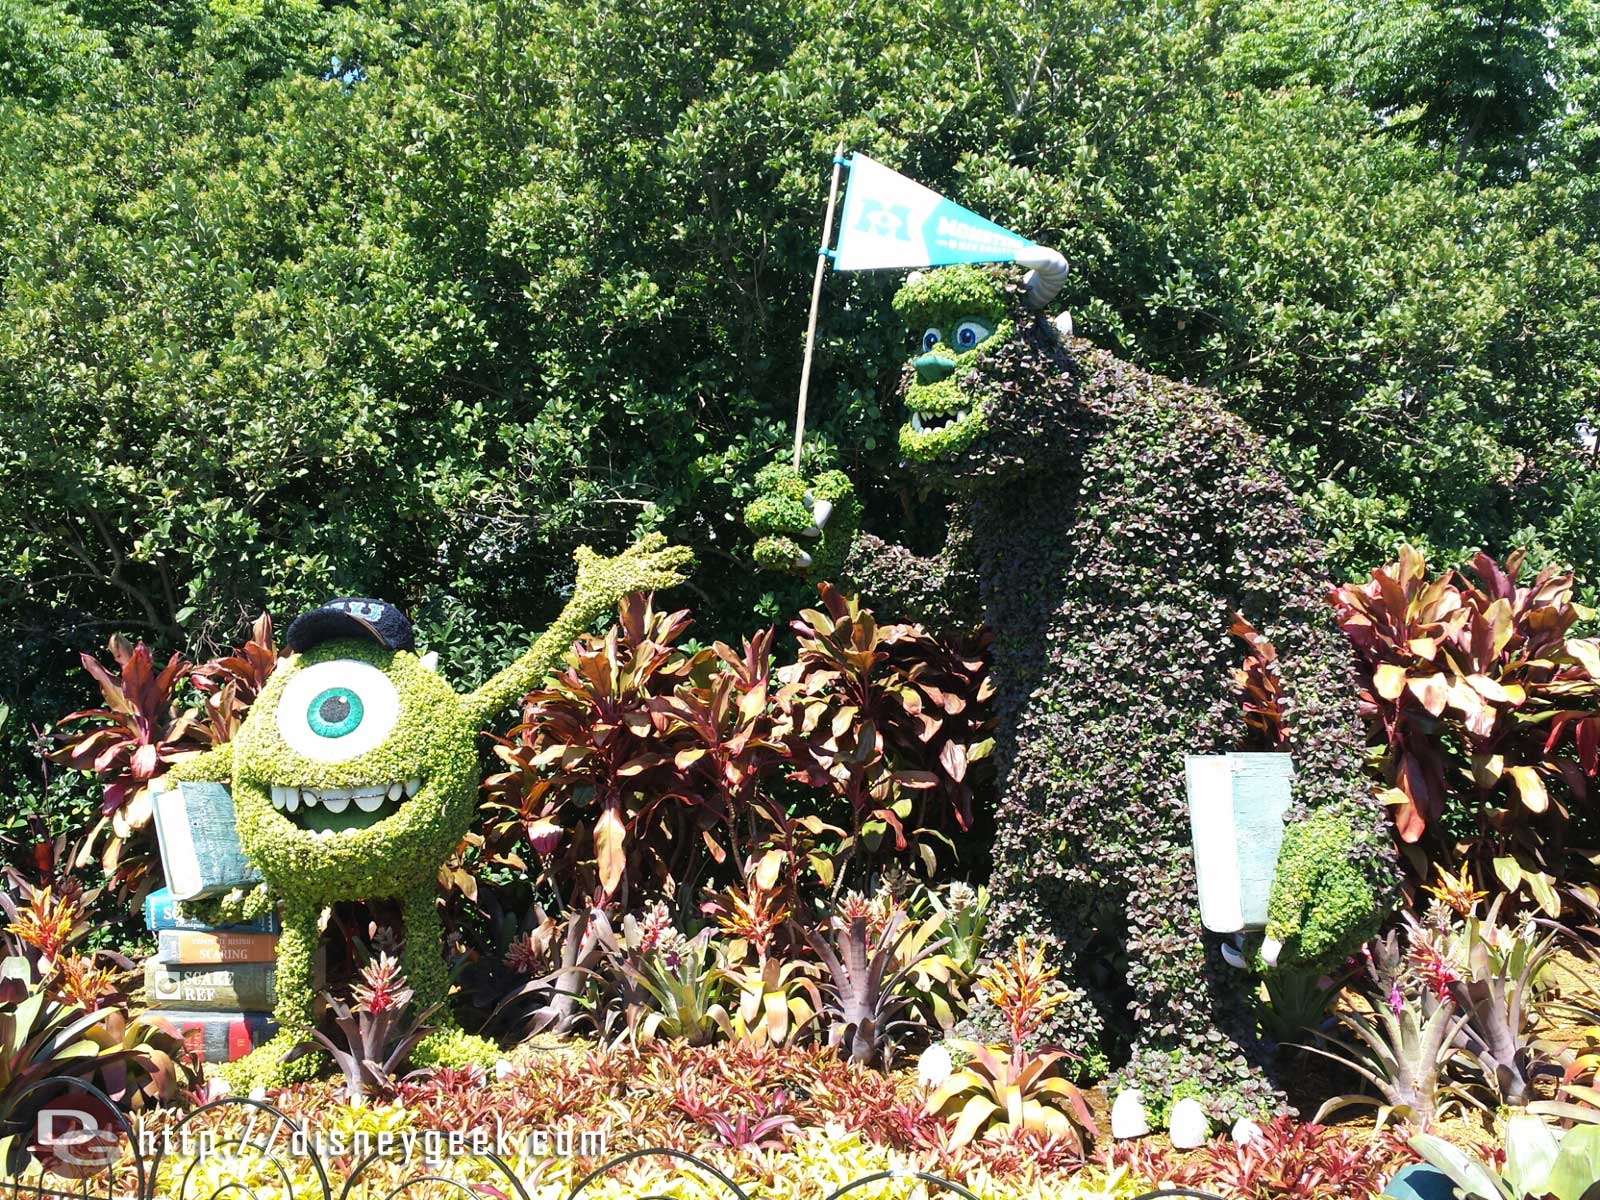 Mike and Sulley from Monsters University - Epcot International Flower & Garden Festival